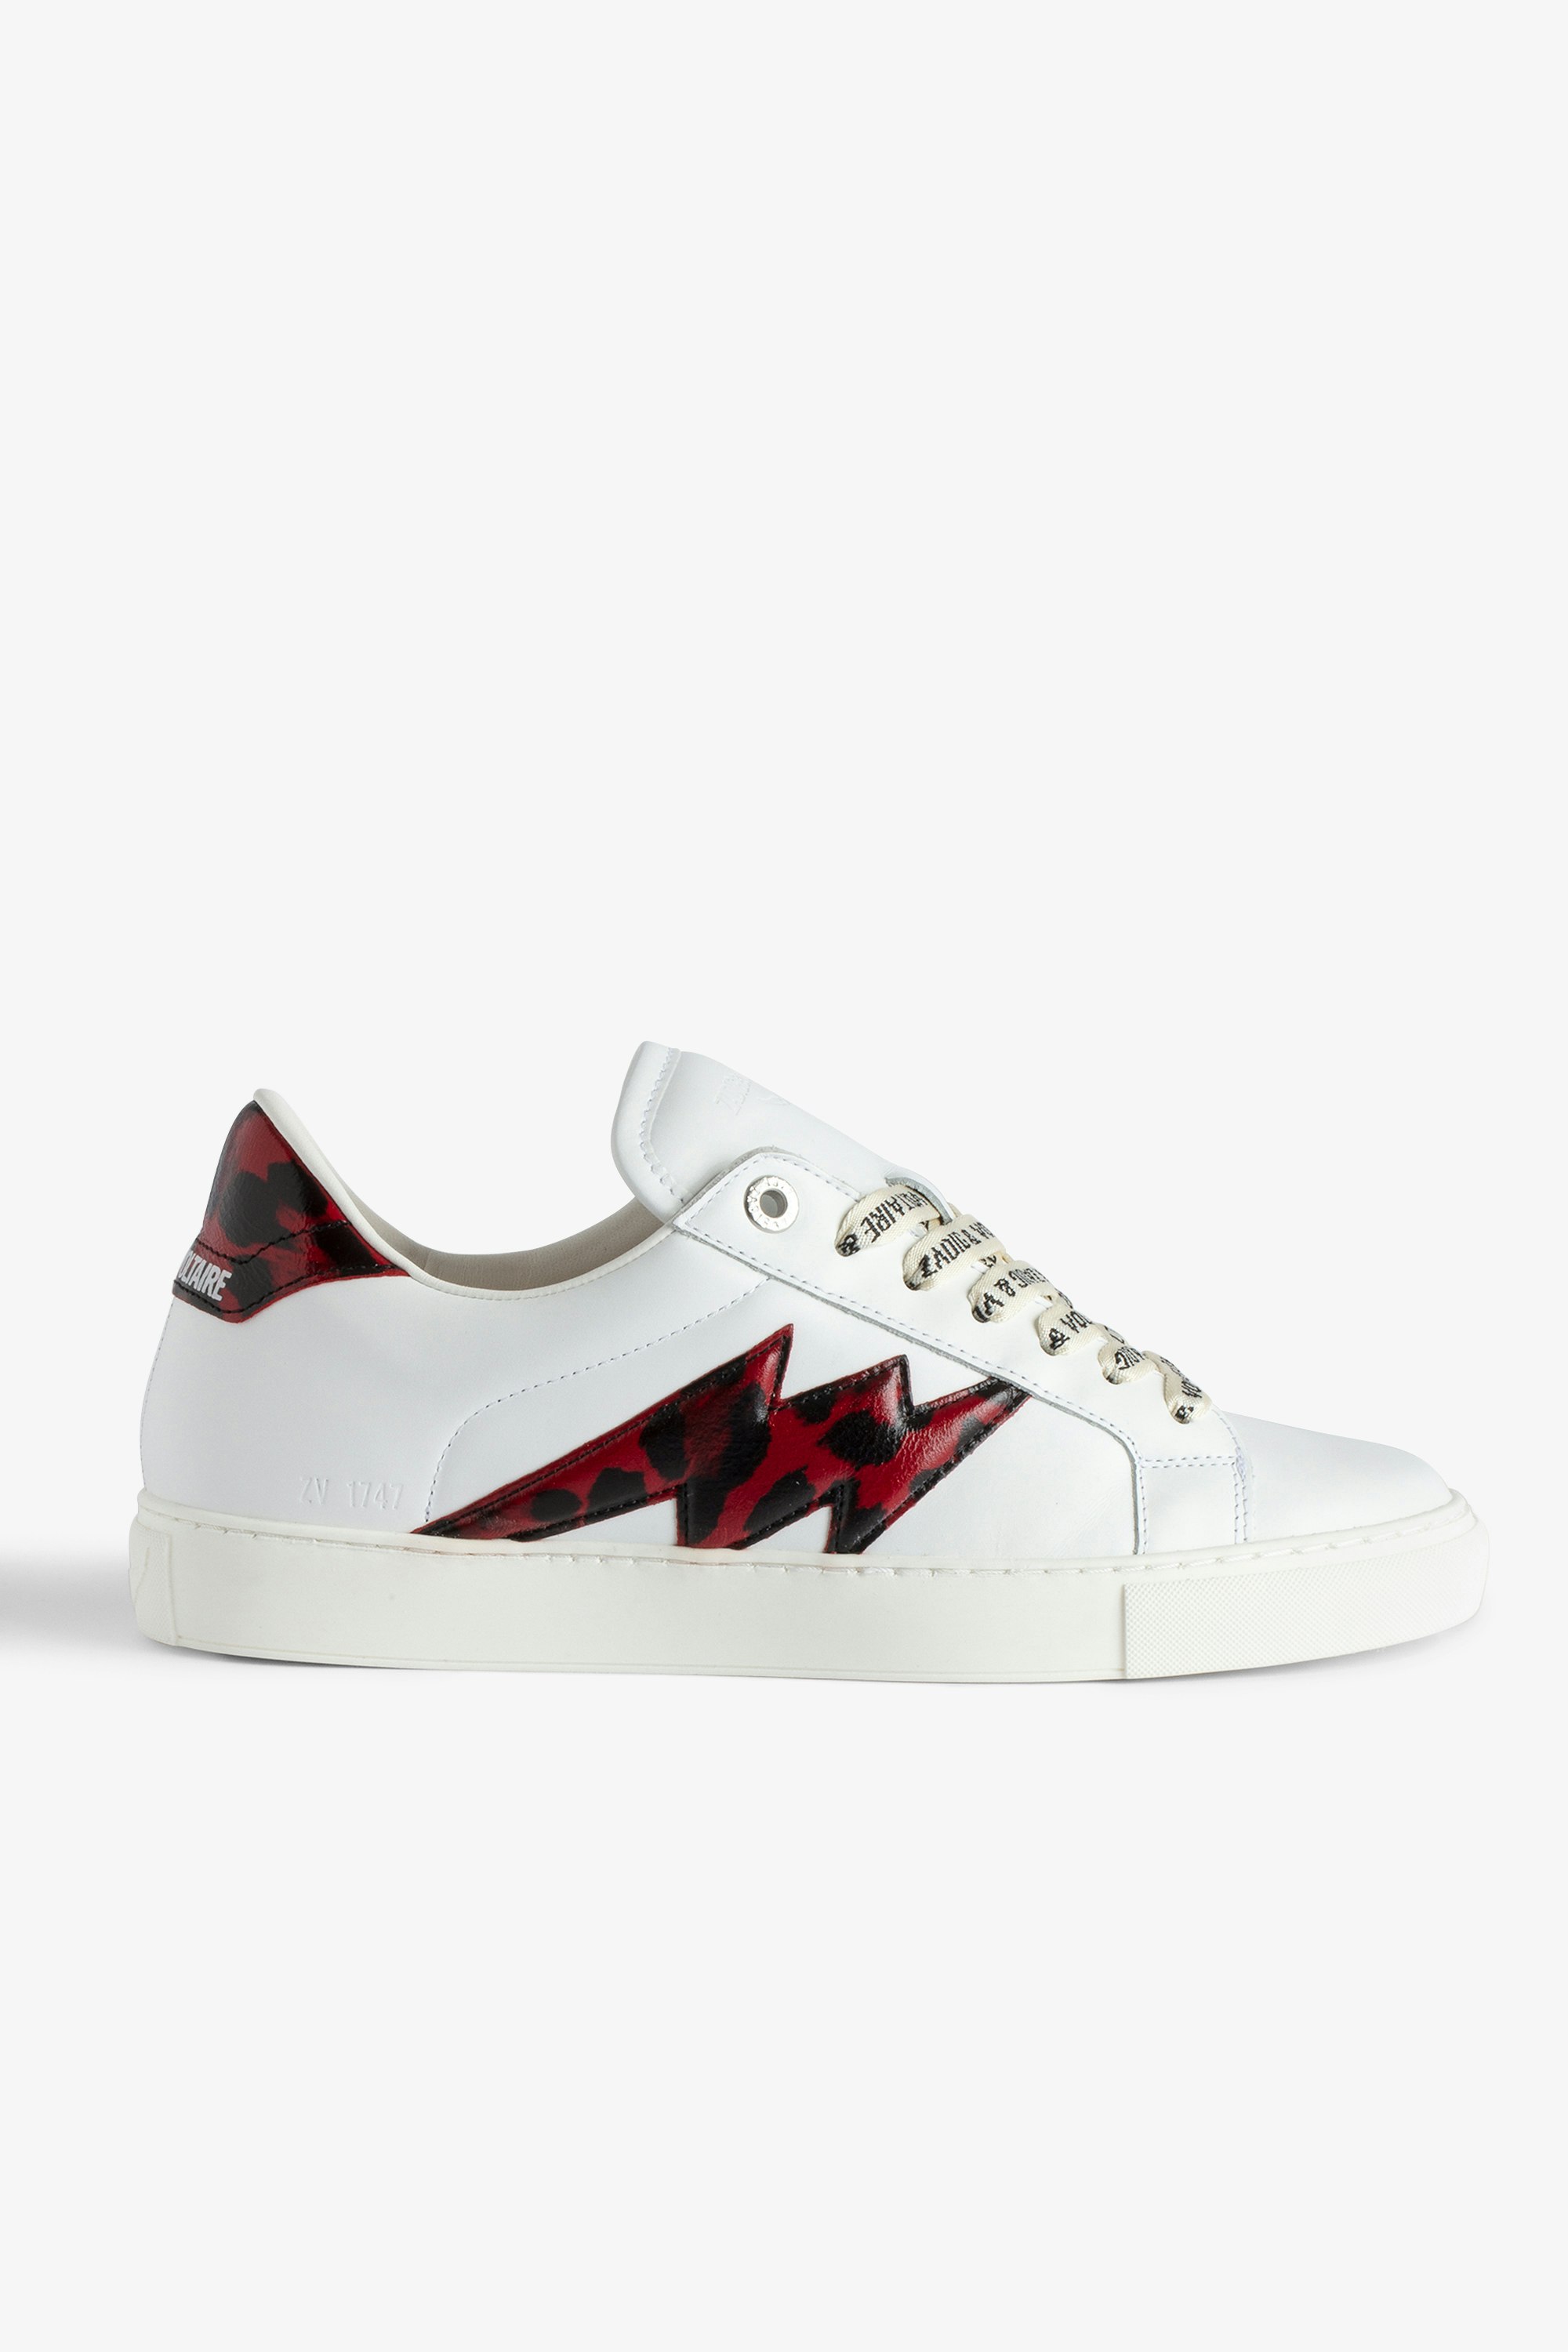 ZV1747 La Flash Low-Top Trainers Women’s white smooth leather low-top trainers with lightning bolt panels and red leopard-effect reinforcement.